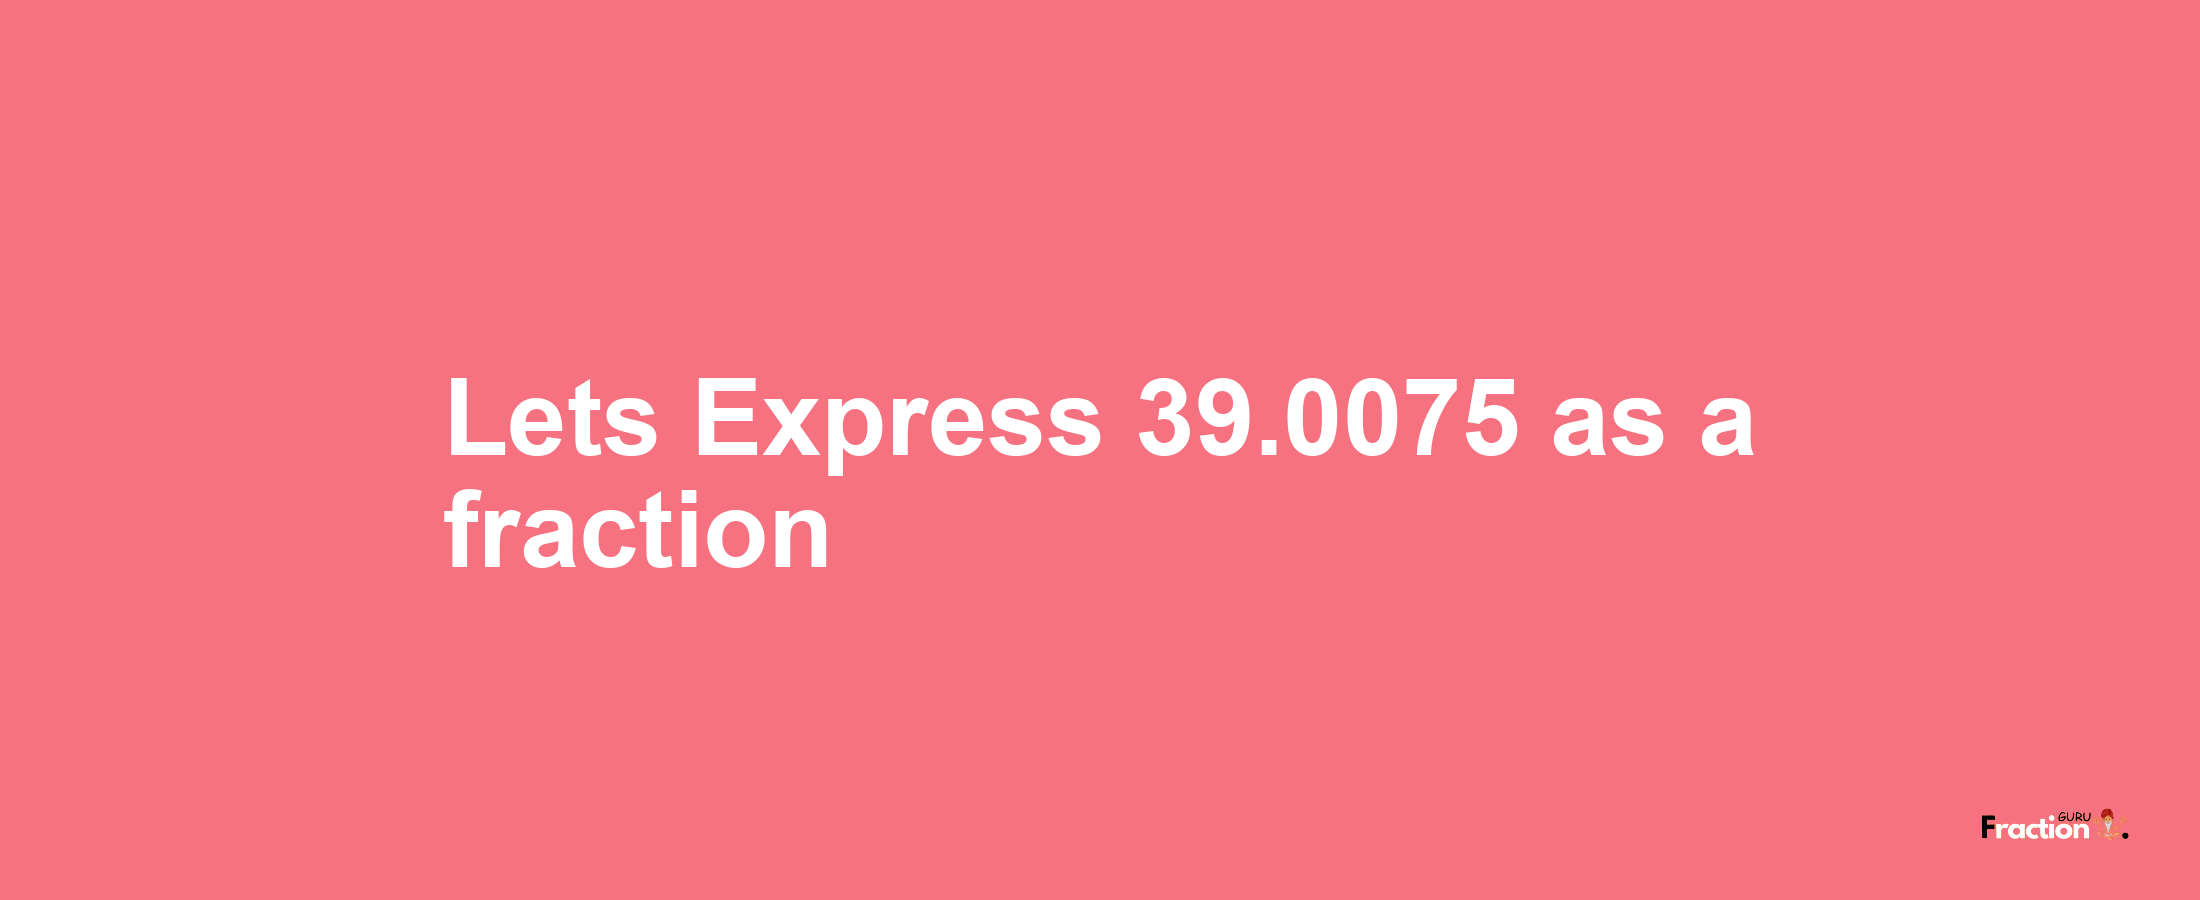 Lets Express 39.0075 as afraction